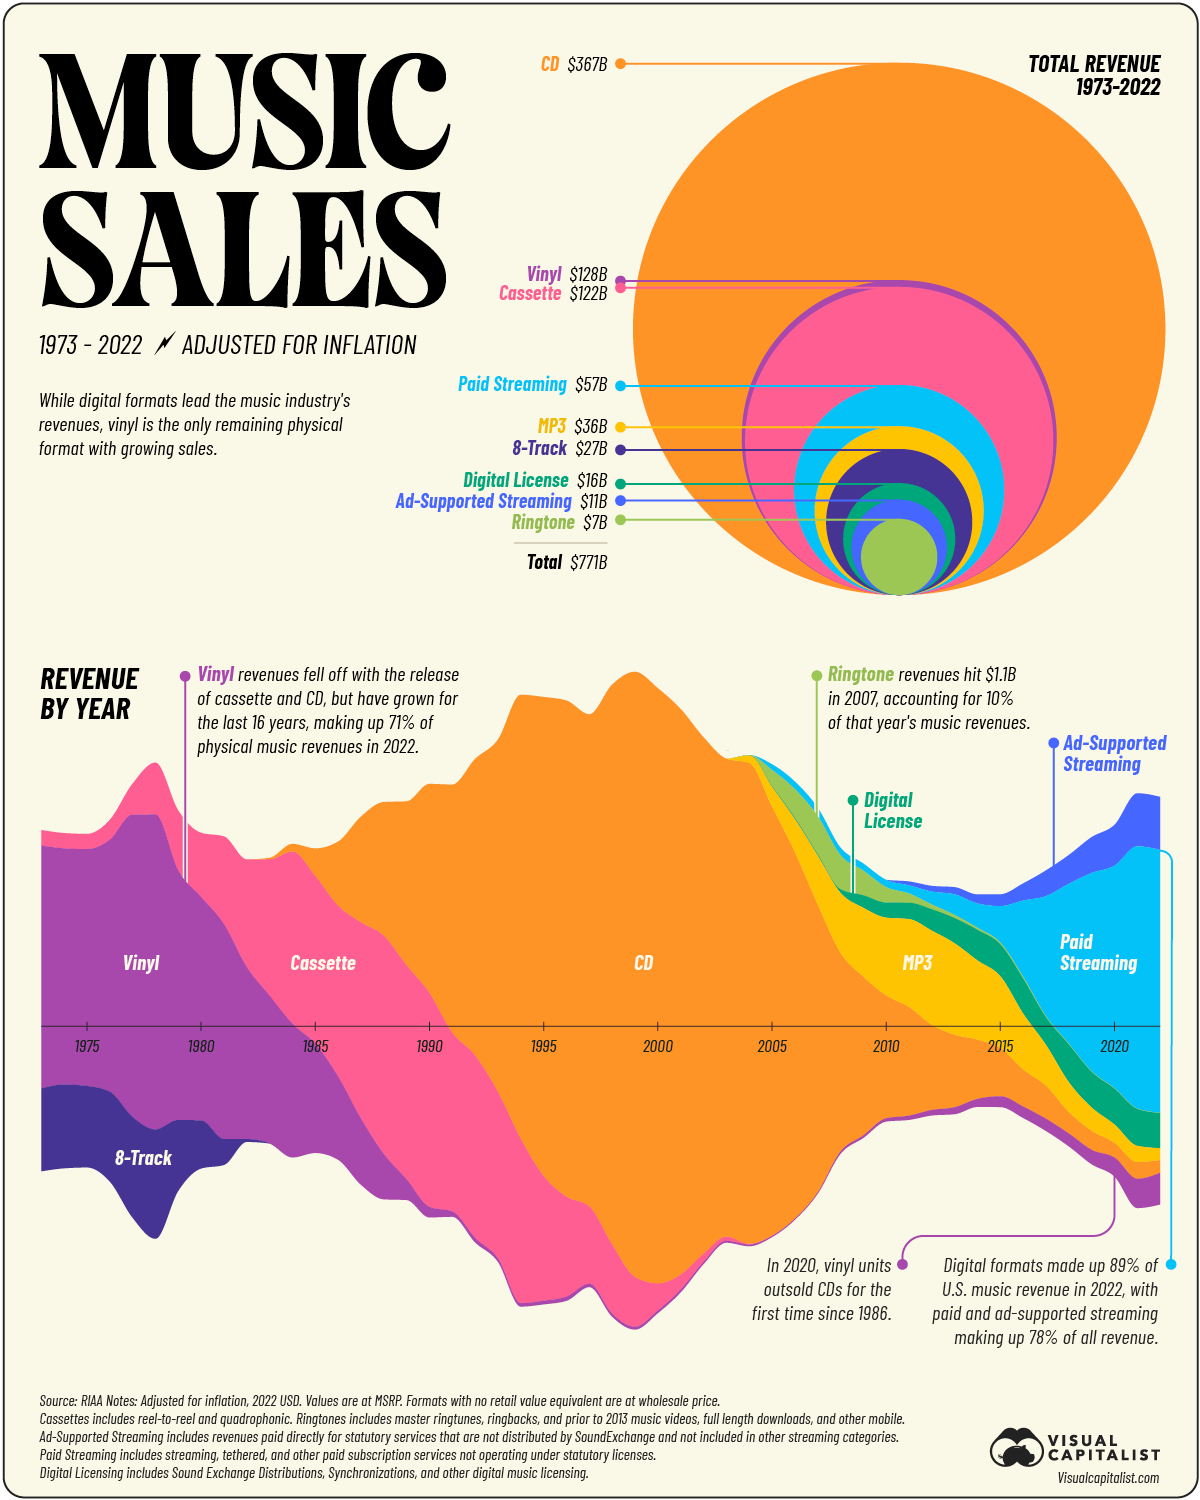 charting the music industry's revenues by format.